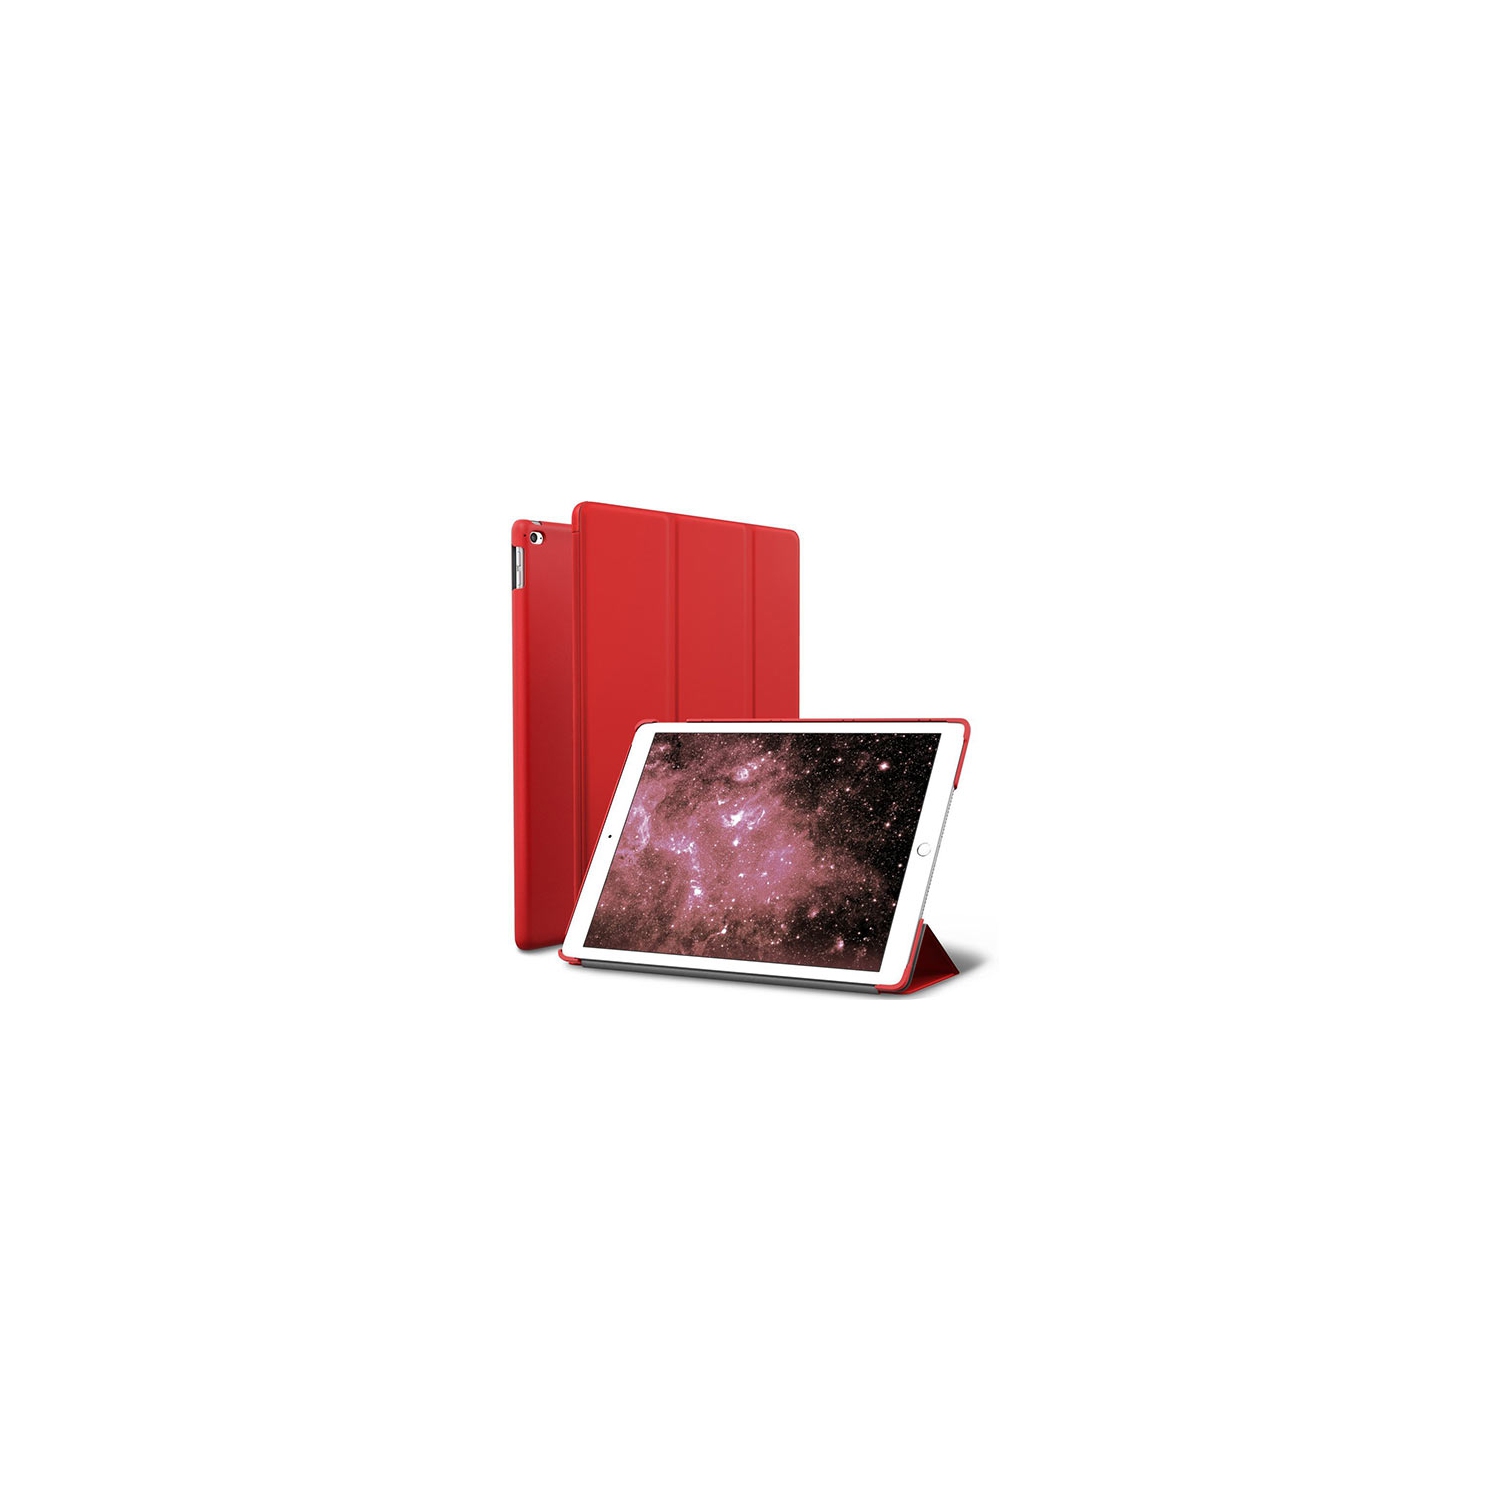 【CSmart】 Slim Magnetic Smart Cover Stand Case for iPad 5th 6th Gen / Air 1 2 1st 2nd Gen (9.7"), Red